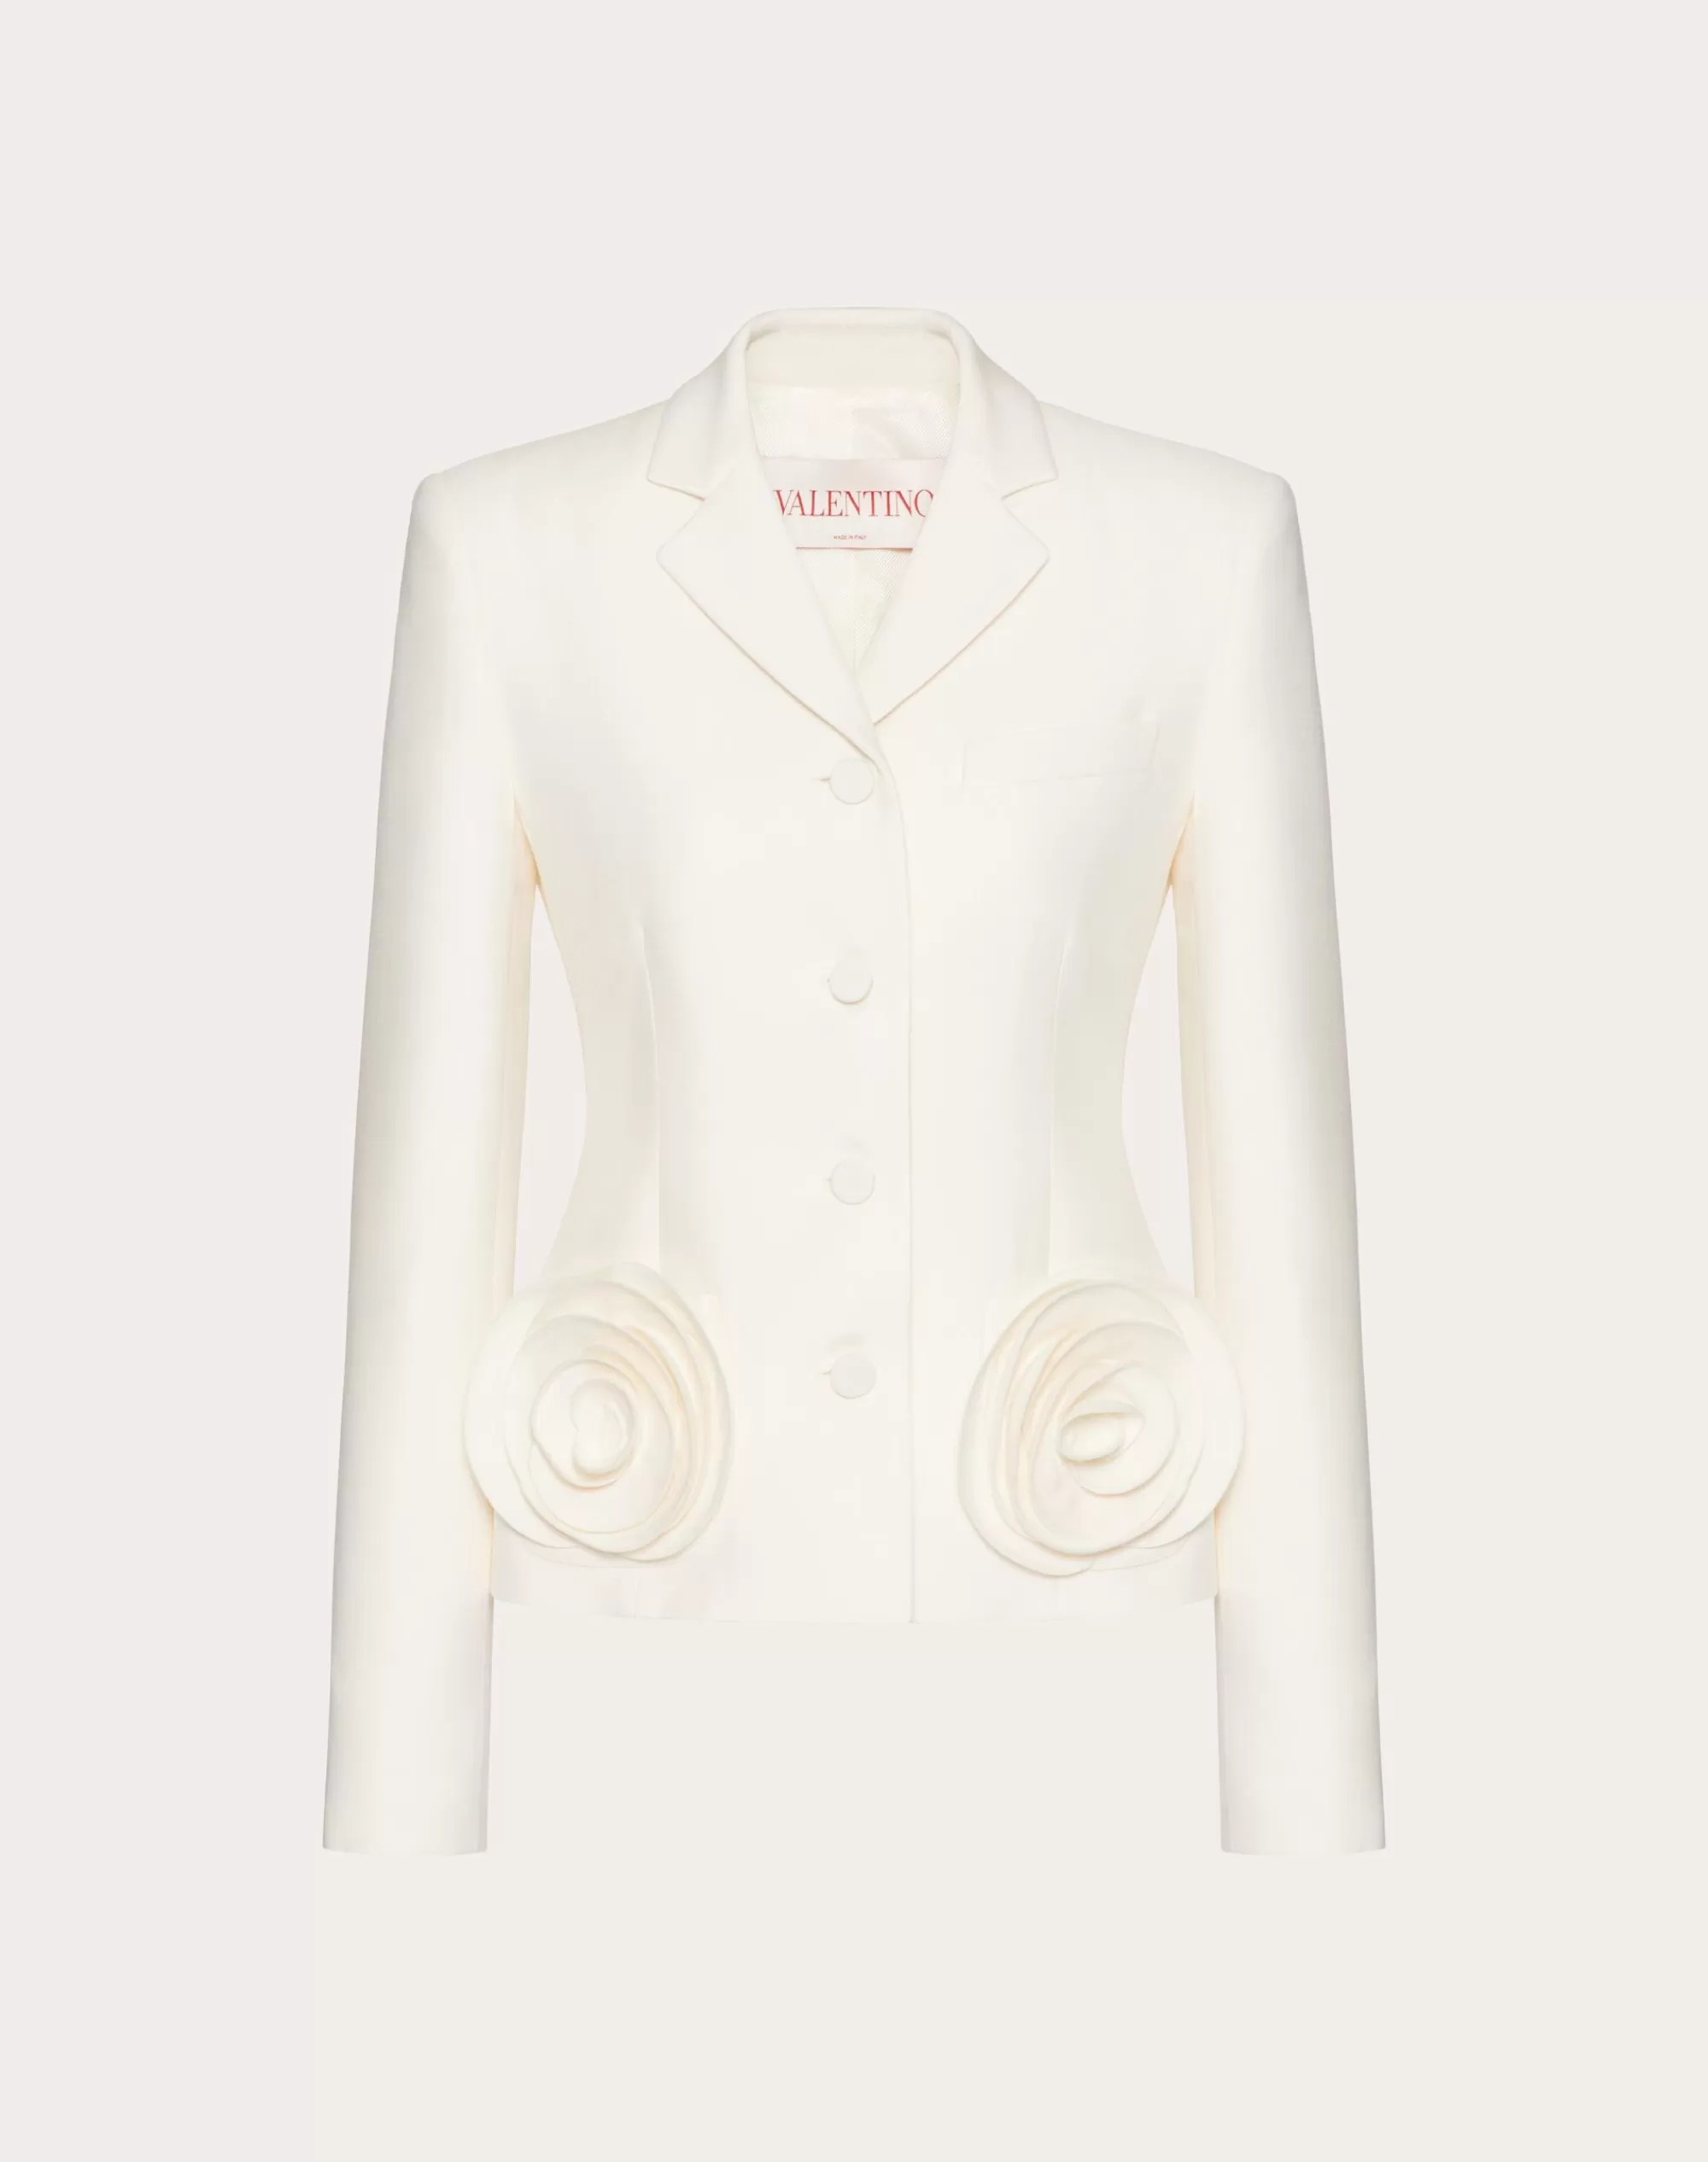 Valentino CREPE COUTURE JACKET Ivory Hot